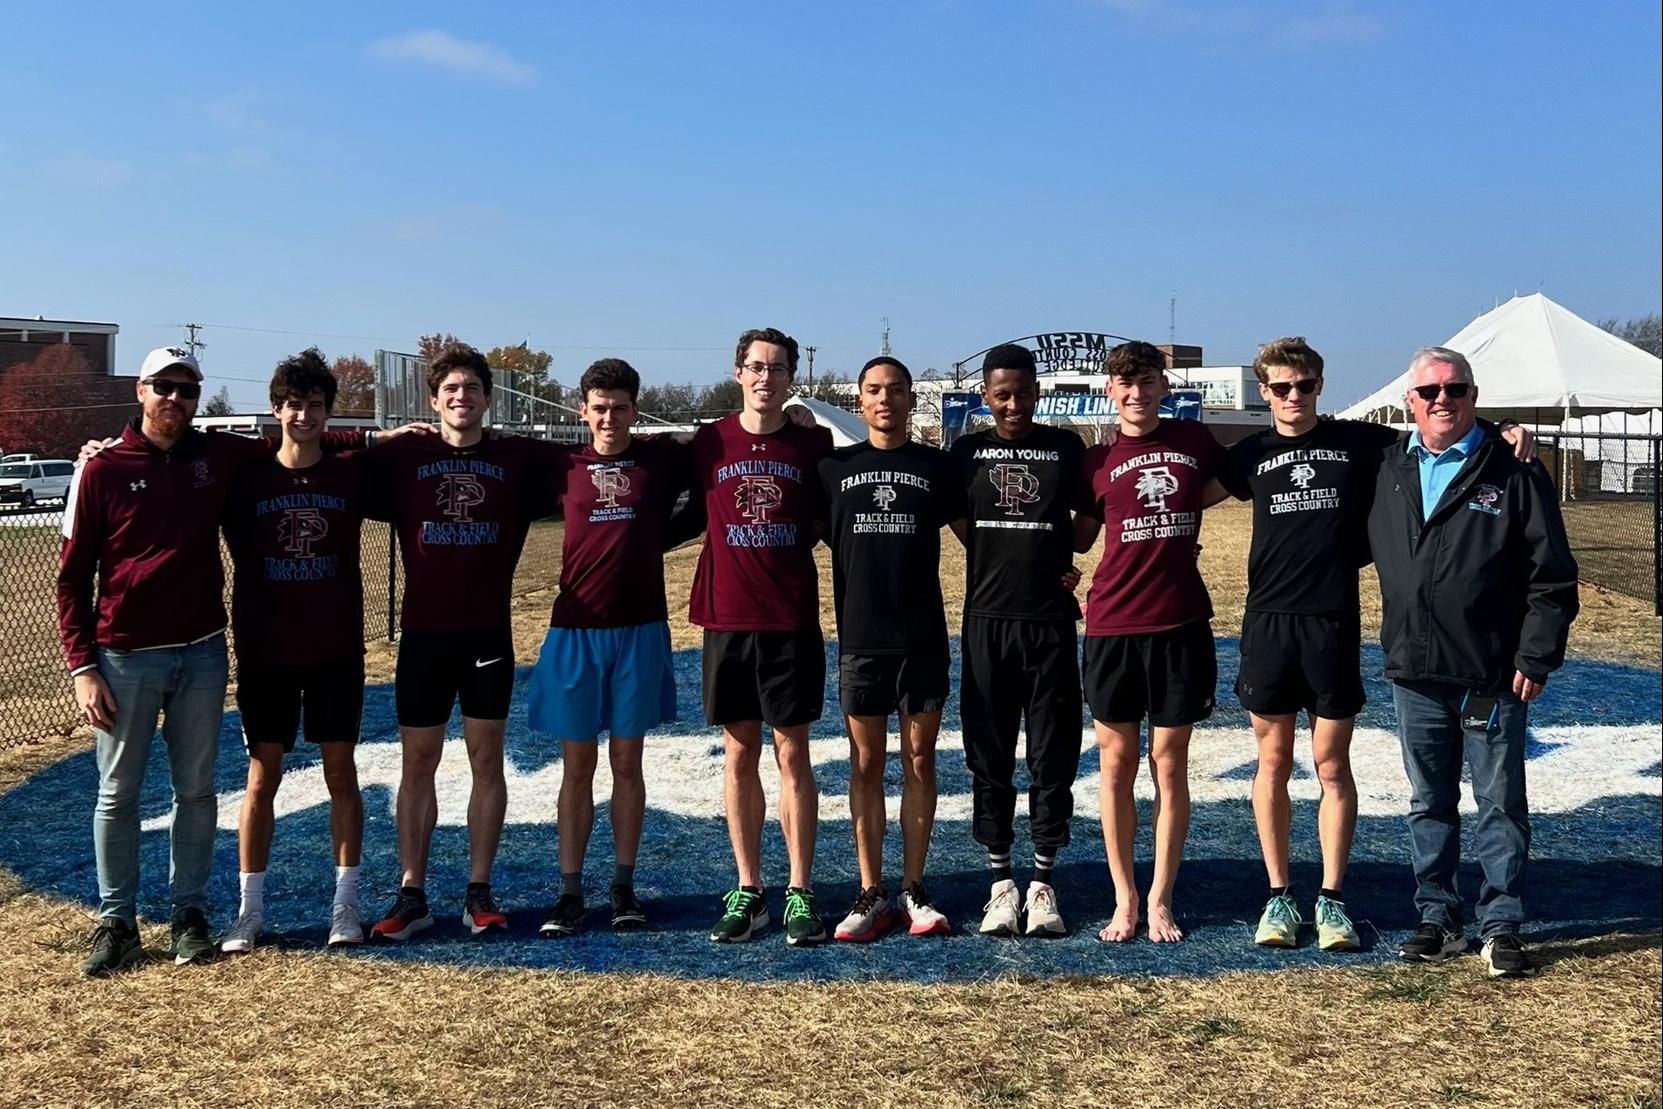 Men's Cross Country: Viewer Resources for the 2023 National Championships